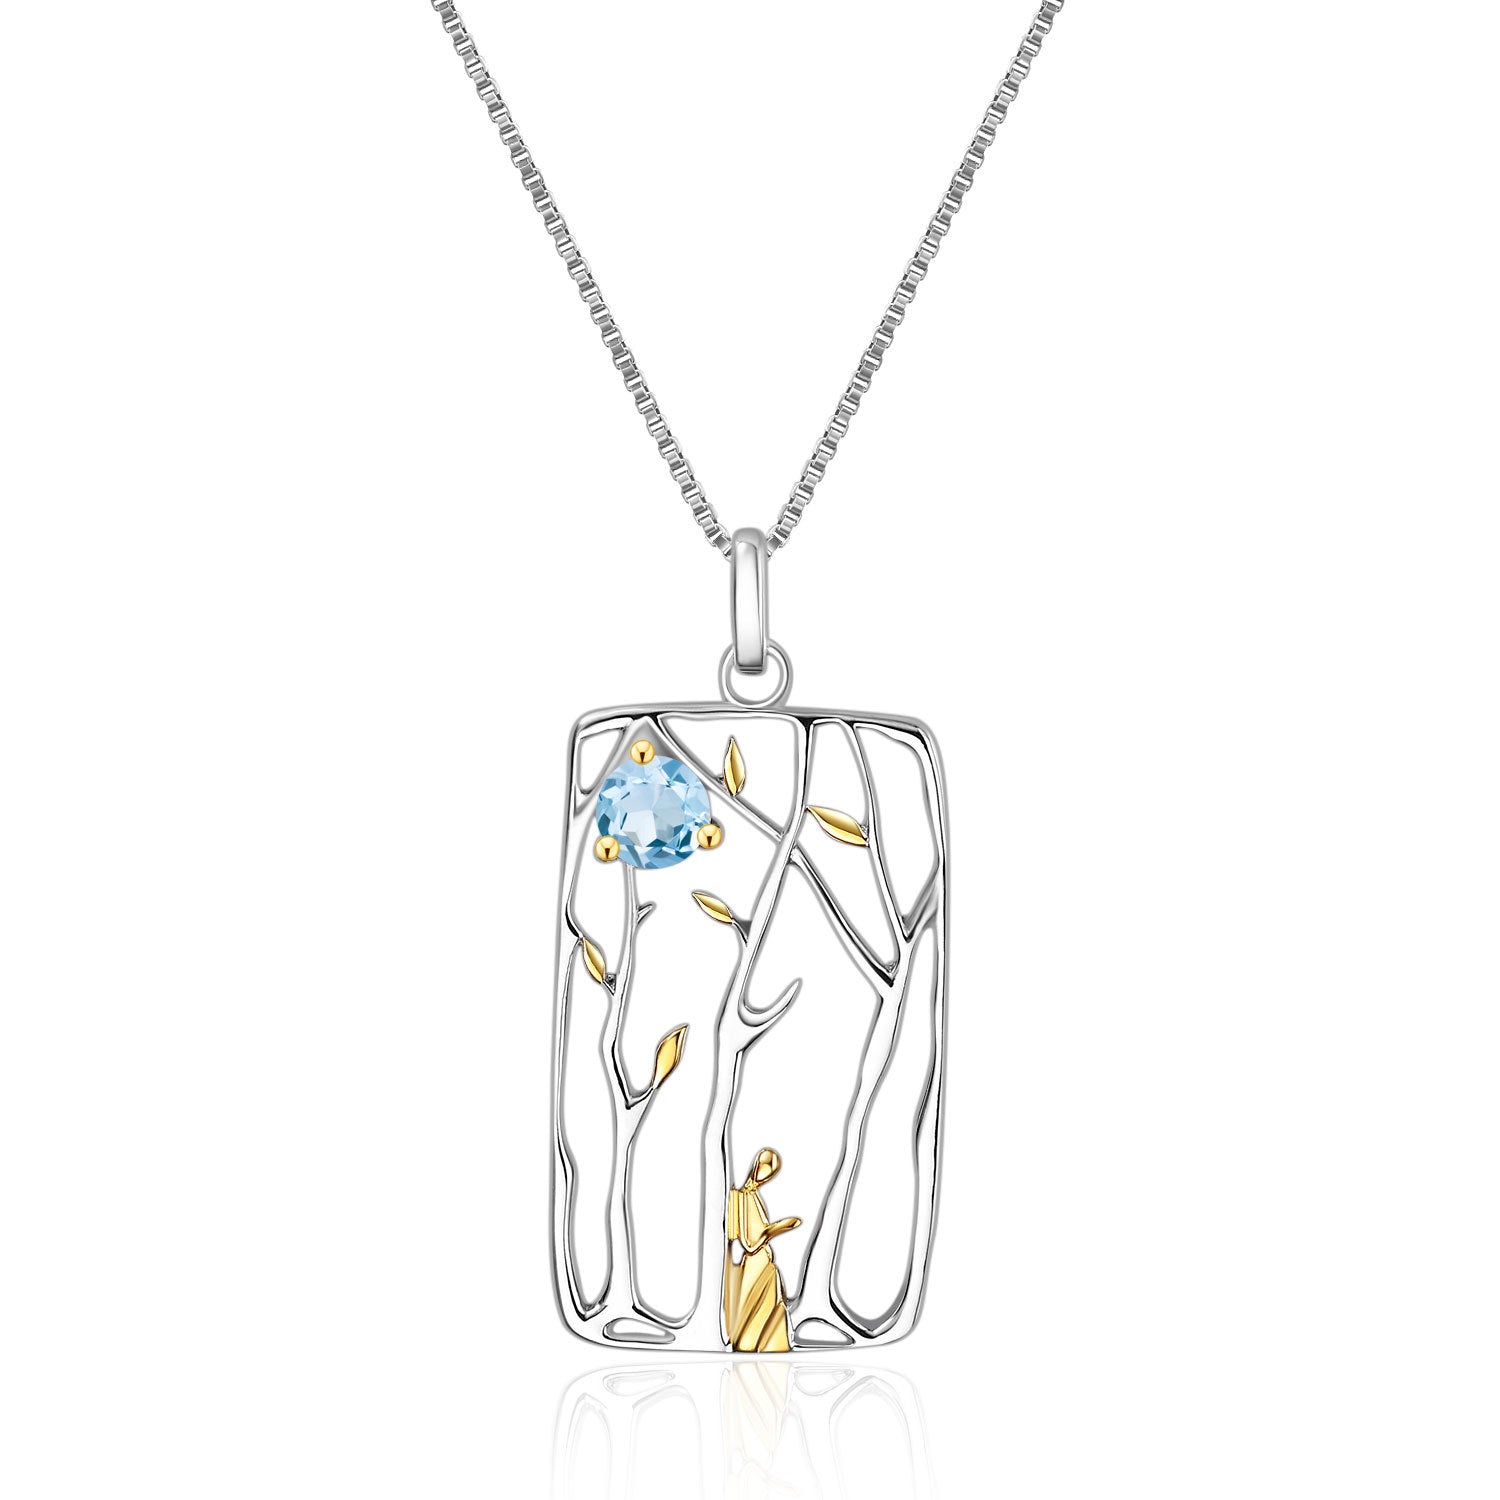 Italian Craftsman Jewelry Abstract Design Inlaid Natural Topaz Rectangle Pendant Silver Necklace for Women